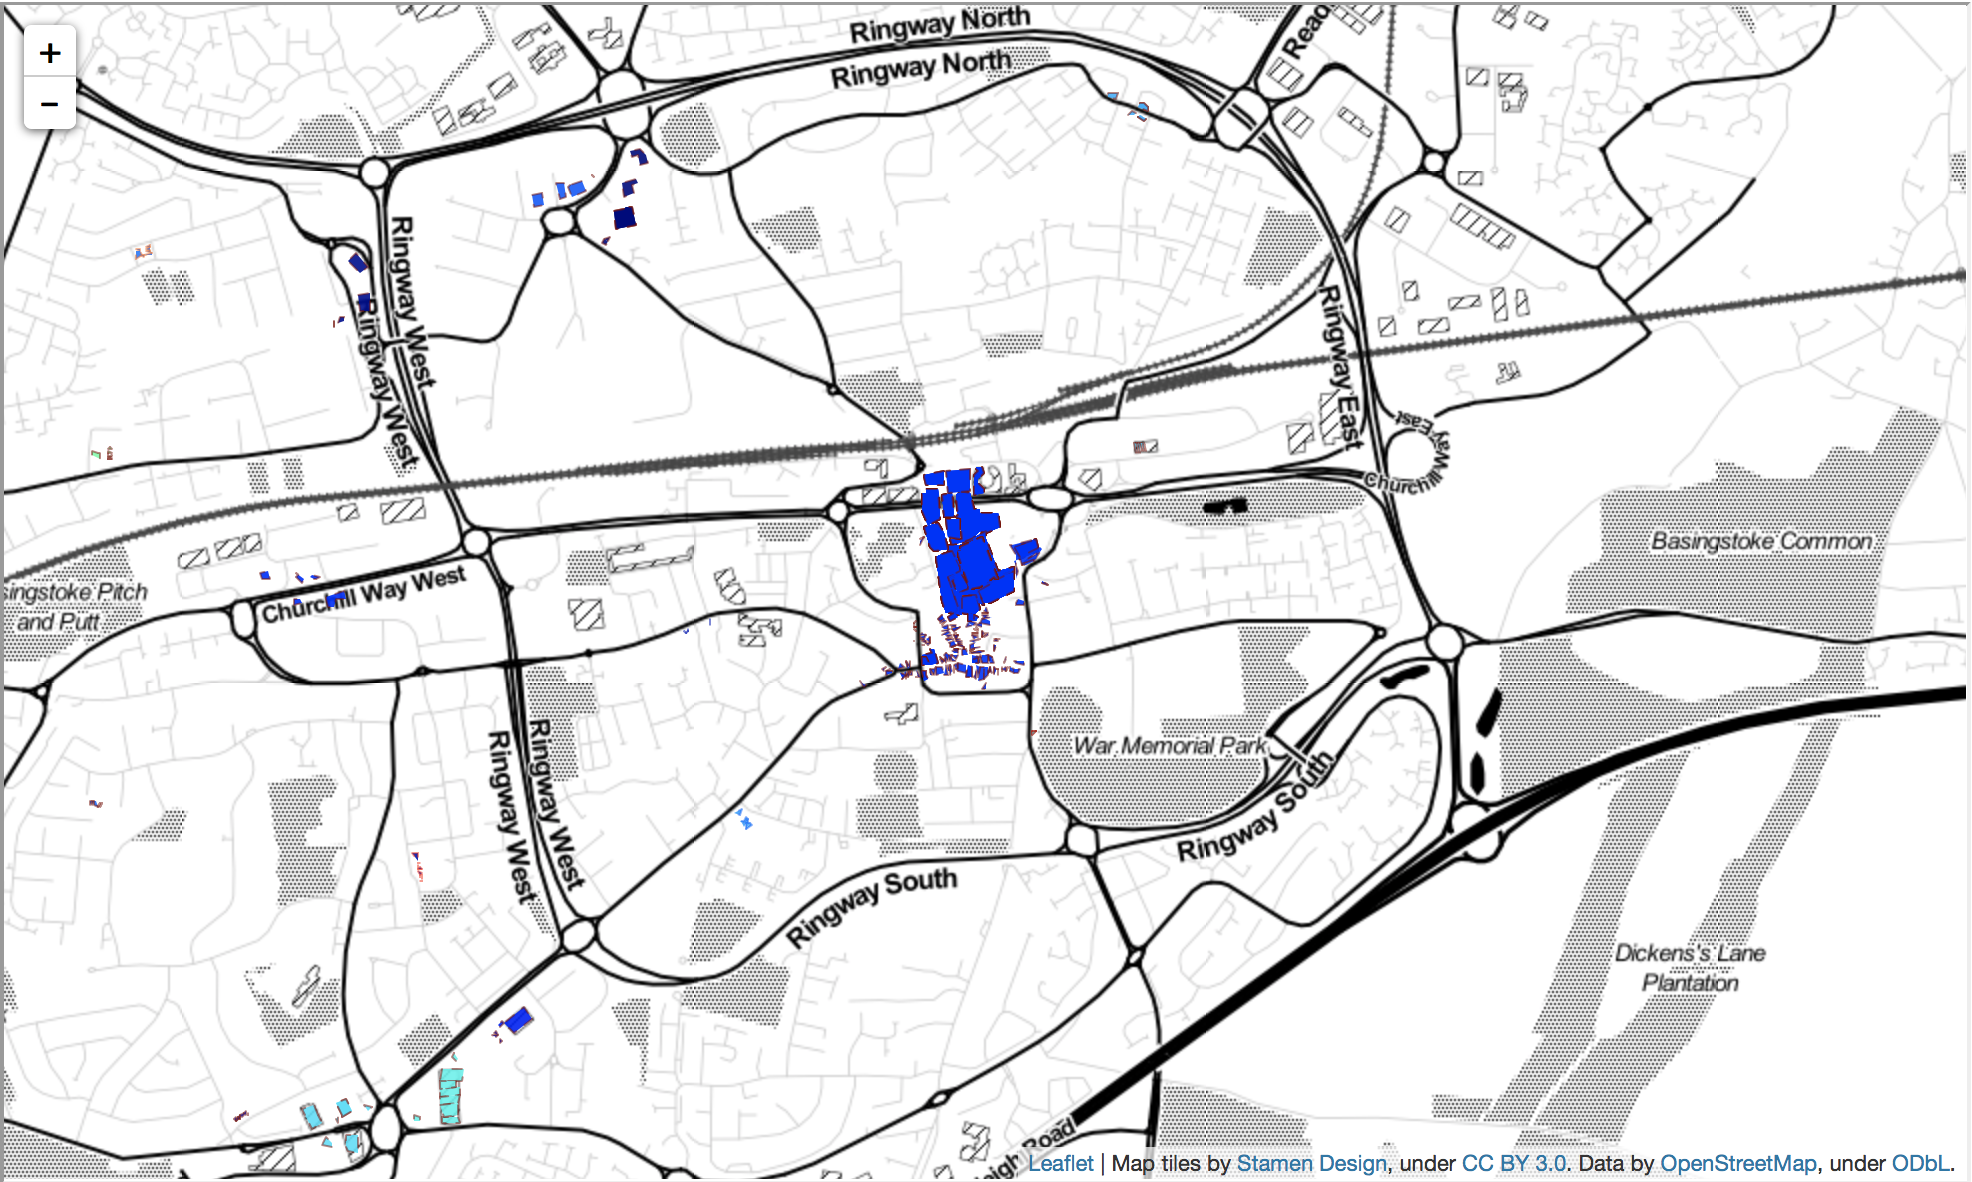 Map representation showing retail clusters for the centre of Birmingham. Described under the heading Company location within retail clusters.